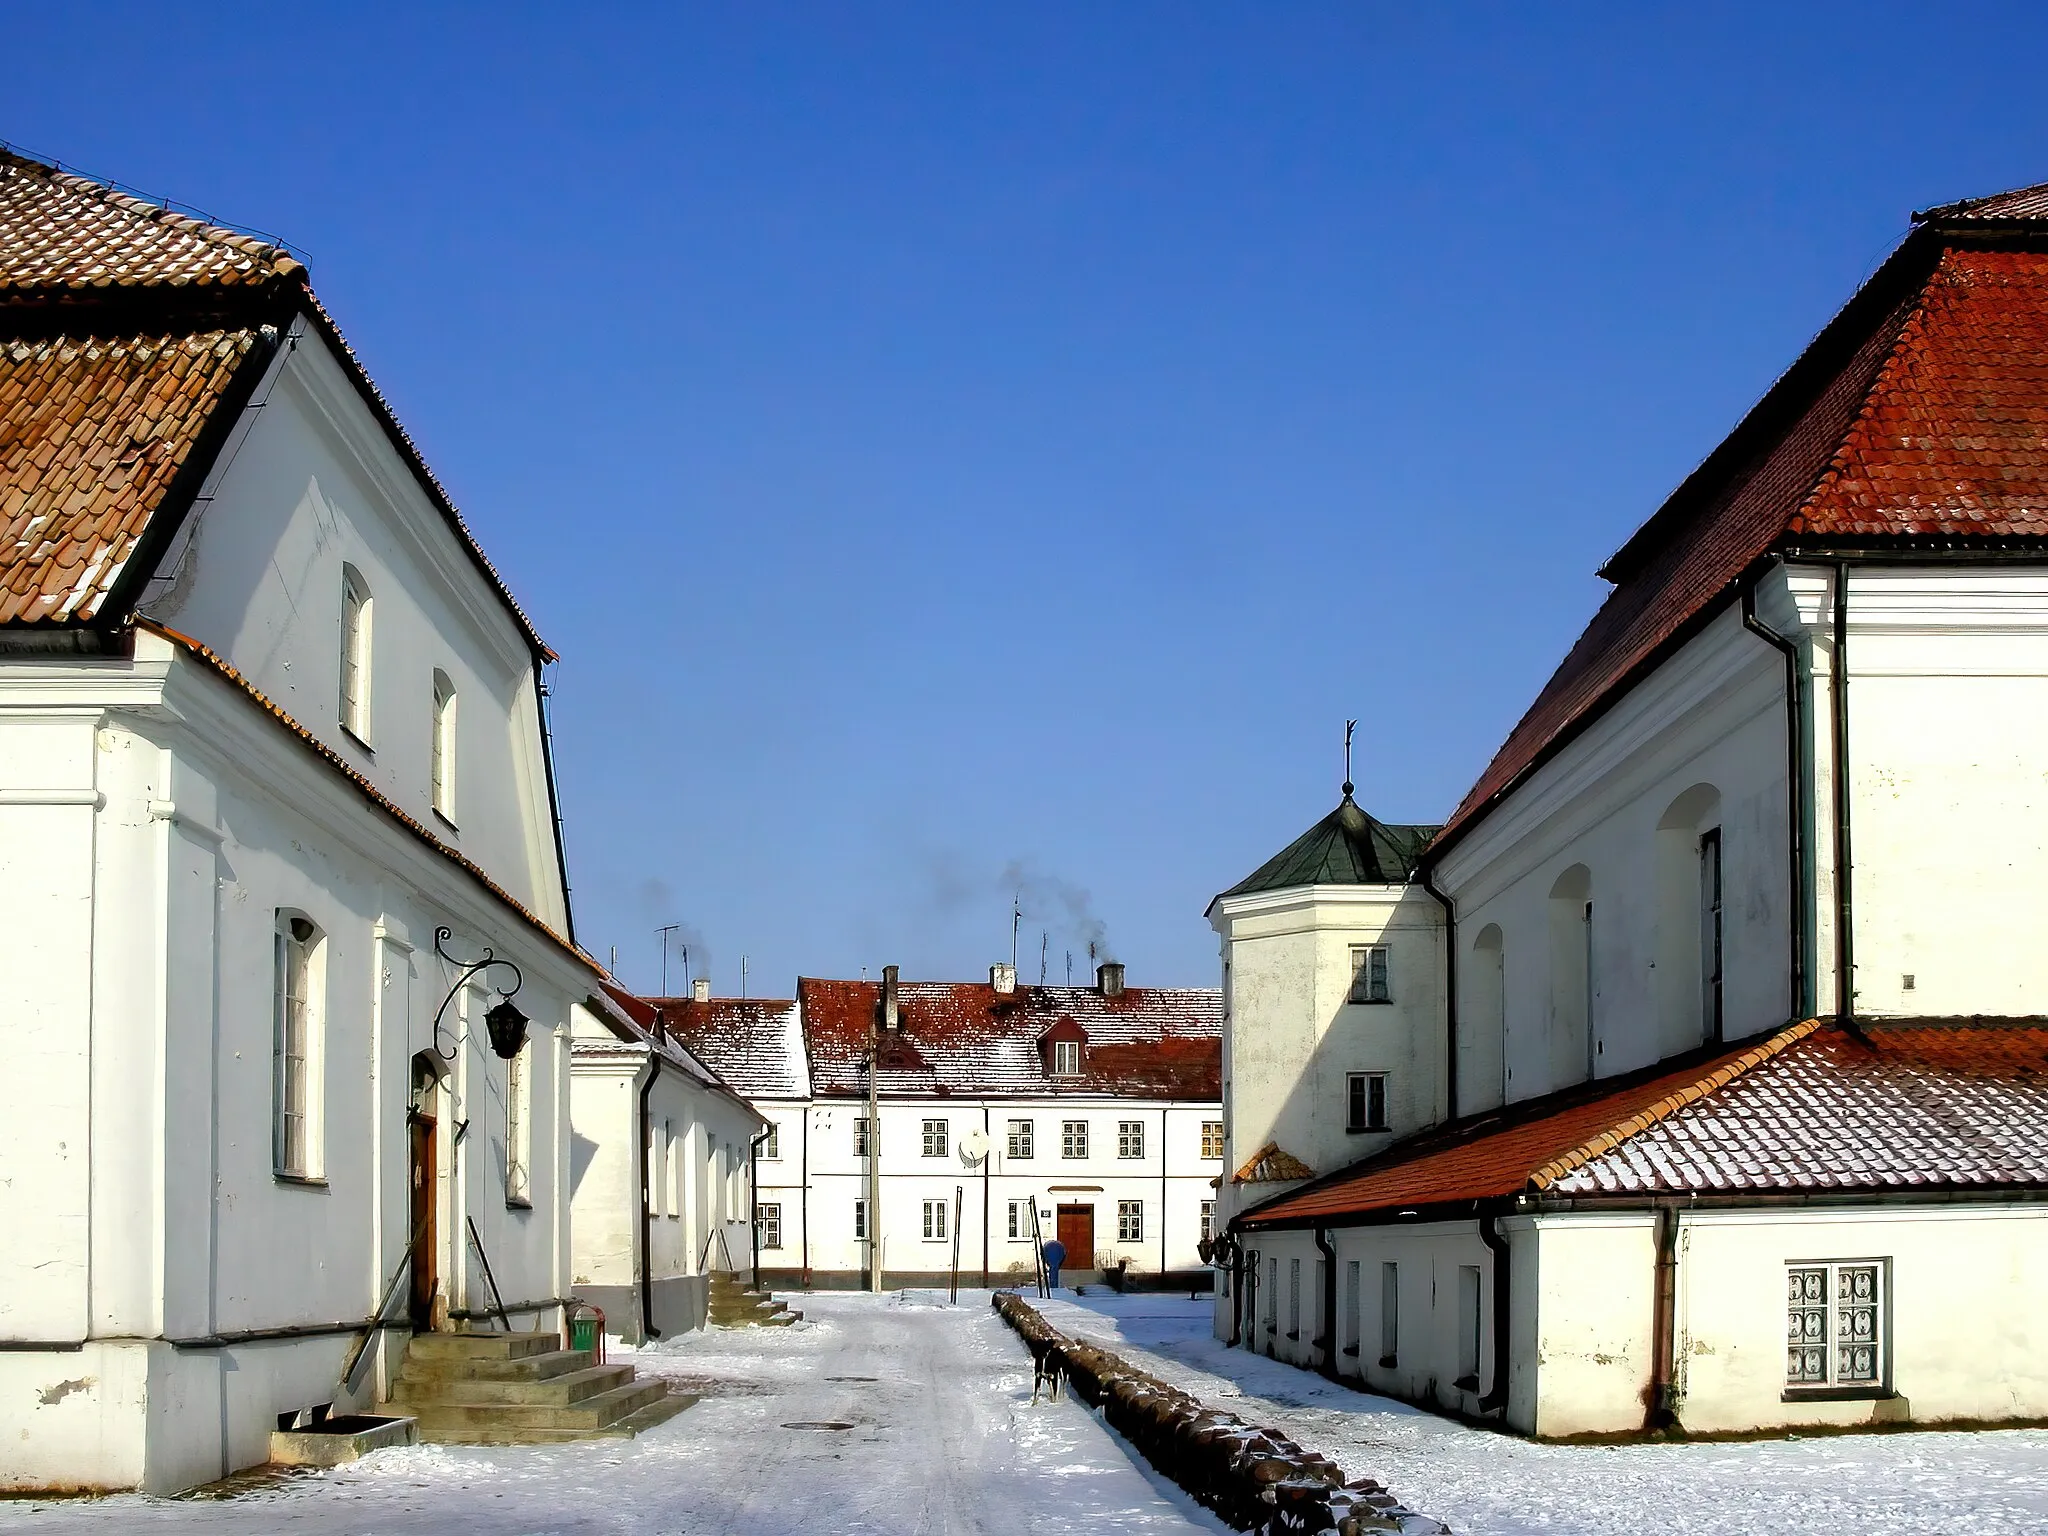 Photo showing: Small Market Square in Tykocin - Piłsudski st.; On the right, the Great Synagogue - condition from 2006, before renovation and color change; On the left, the Talmudic House